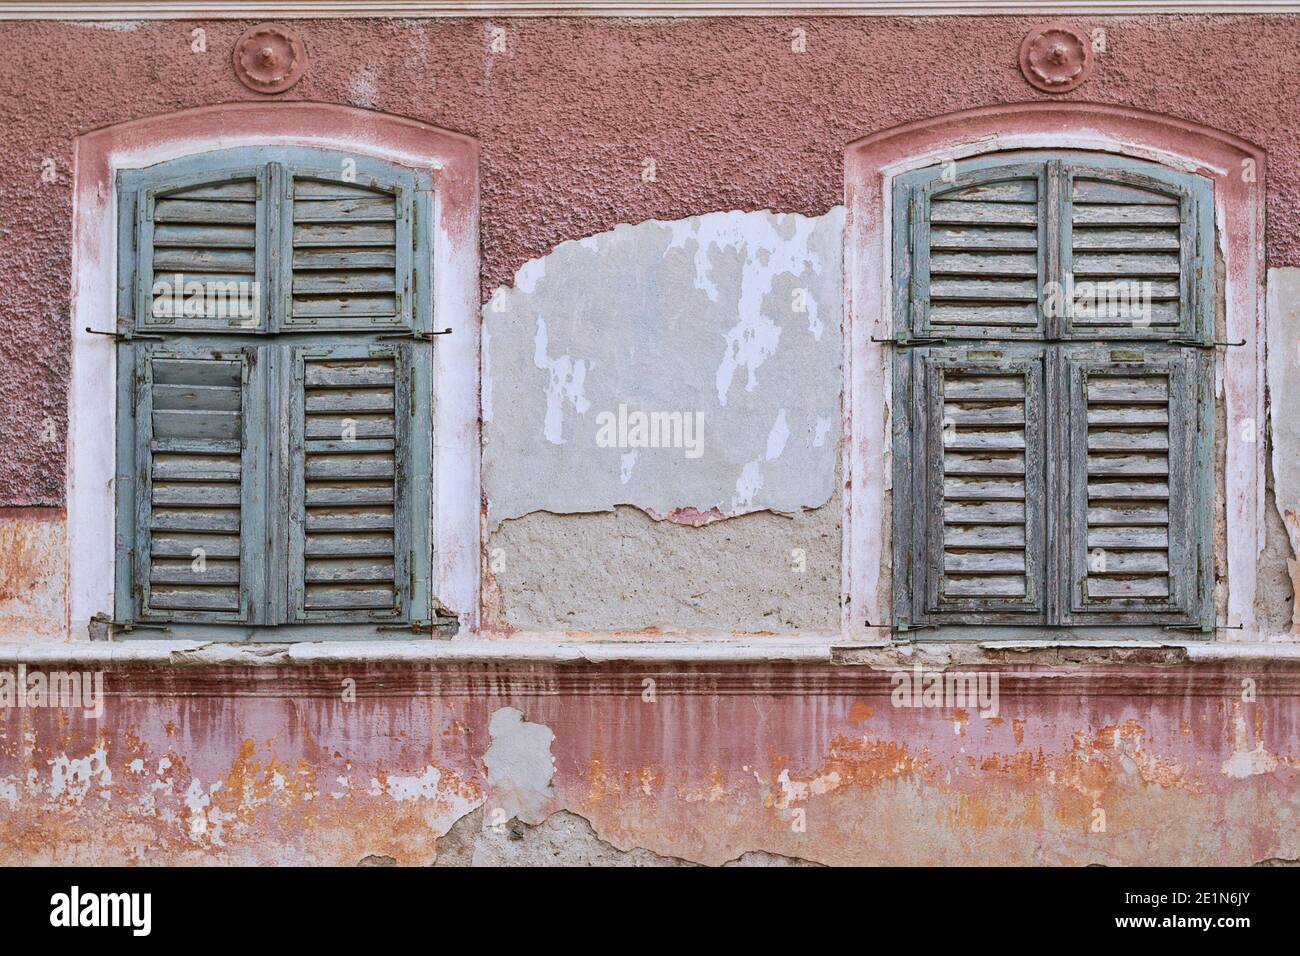 windows with shutters on abandoned traditional house, rchitectural background Stock Photo